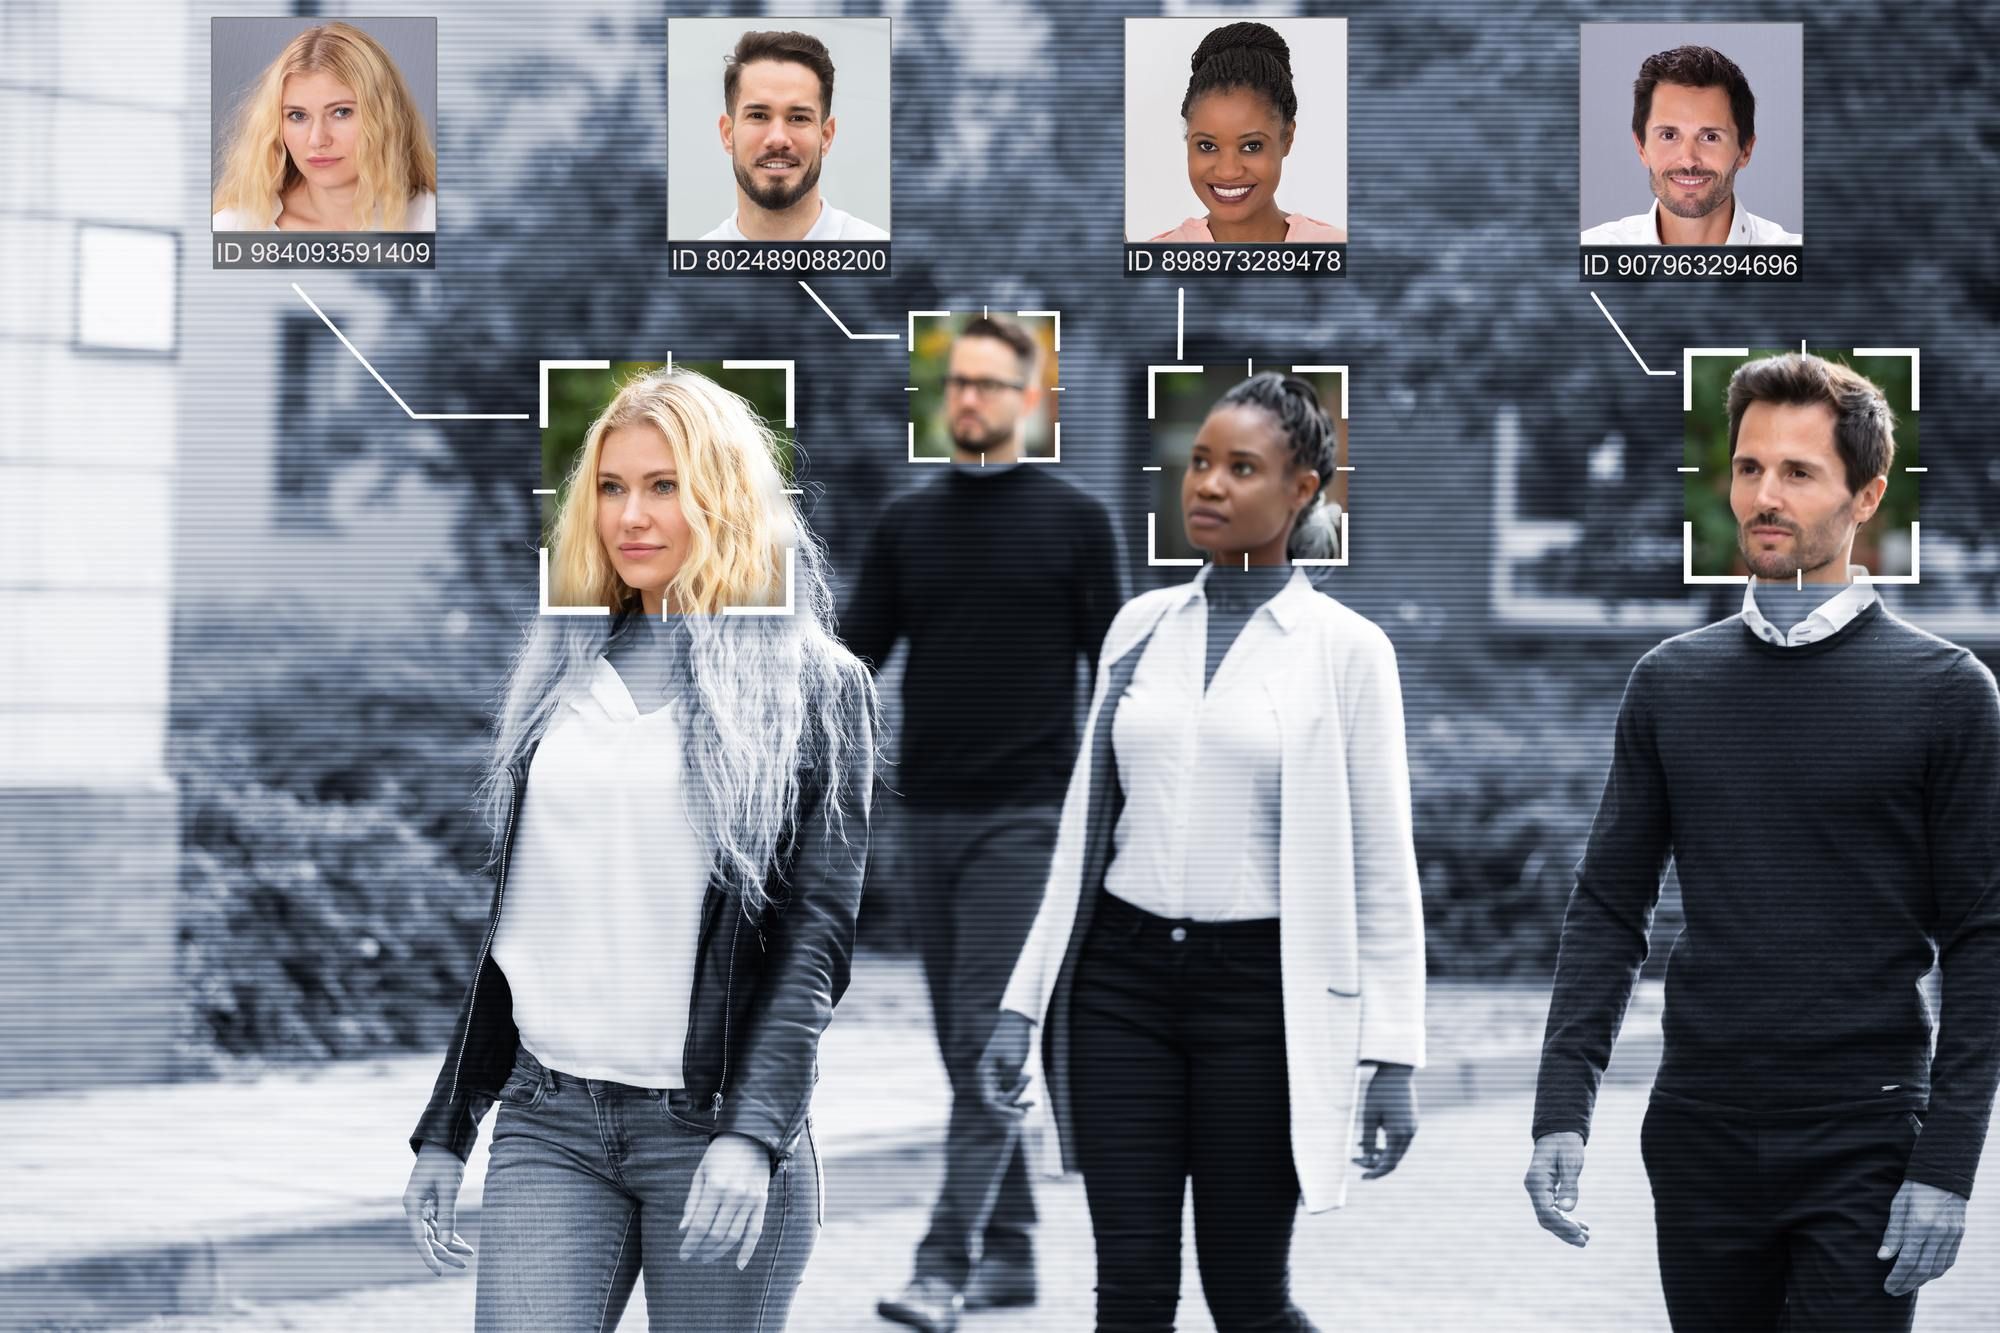 Privacy watchdogs say Clearview AI's facial recognition technology violates Canadian privacy rights.